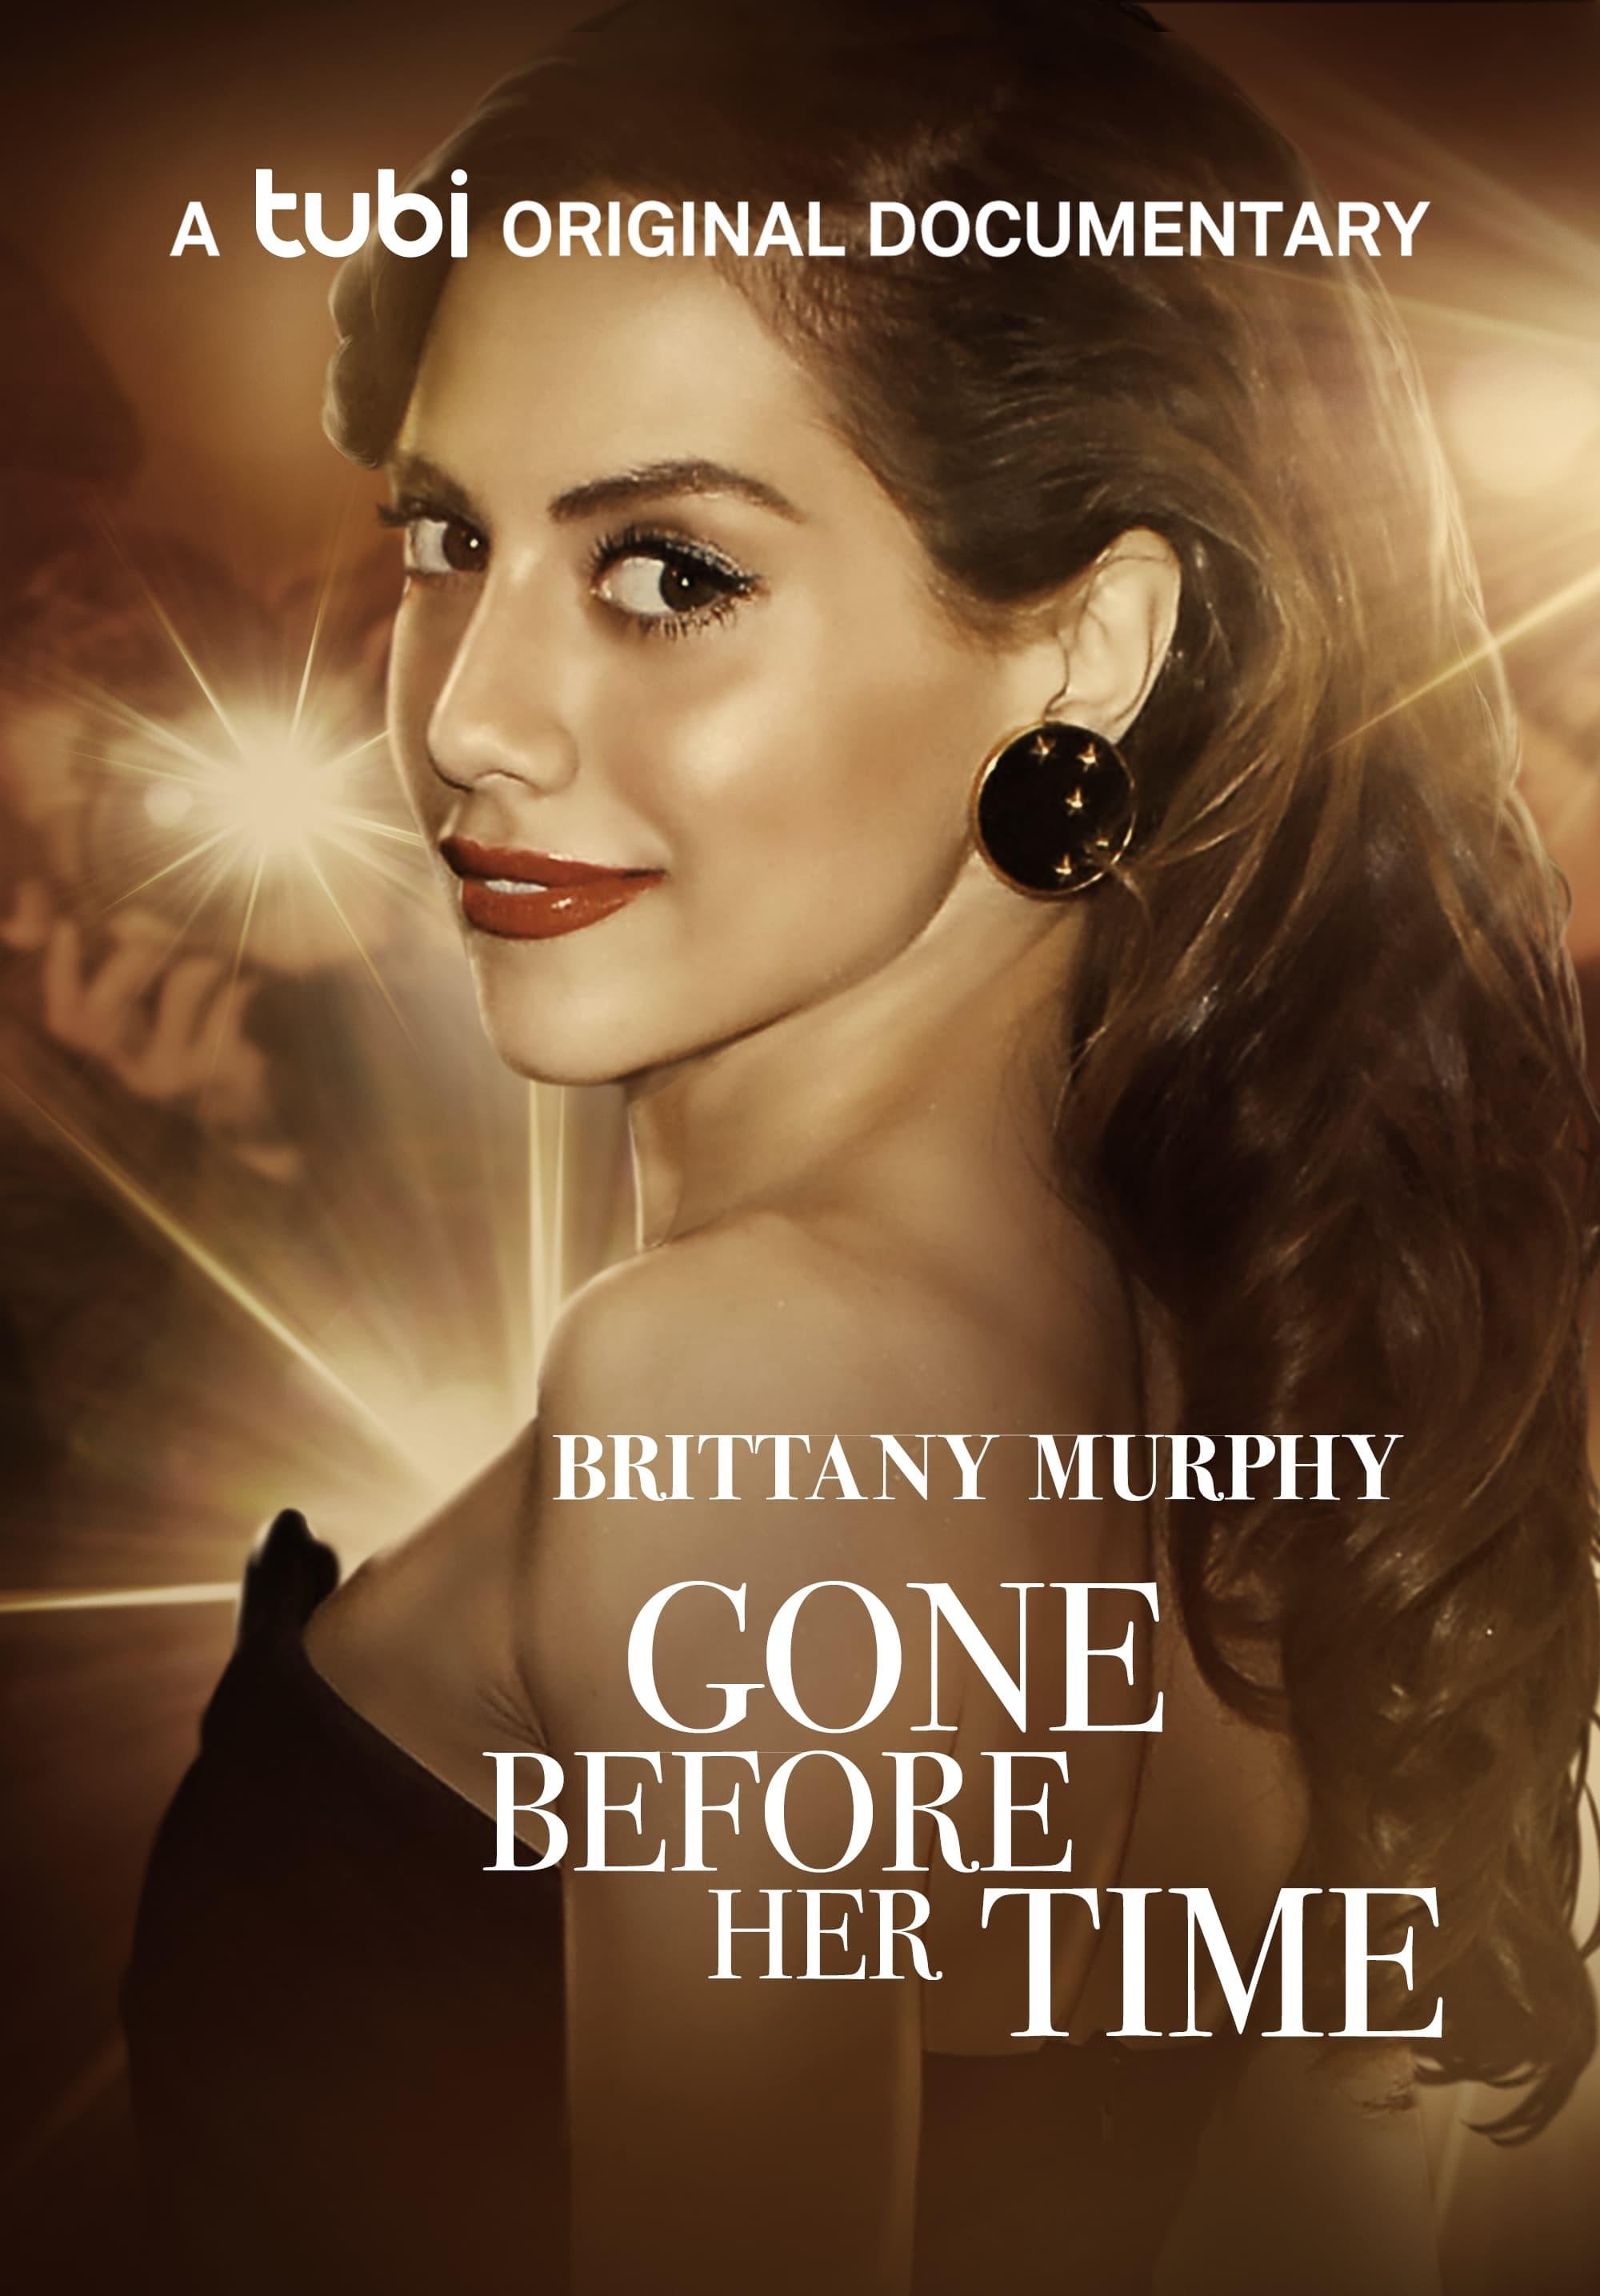 Gone Before Her Time: Brittany Murphy poster